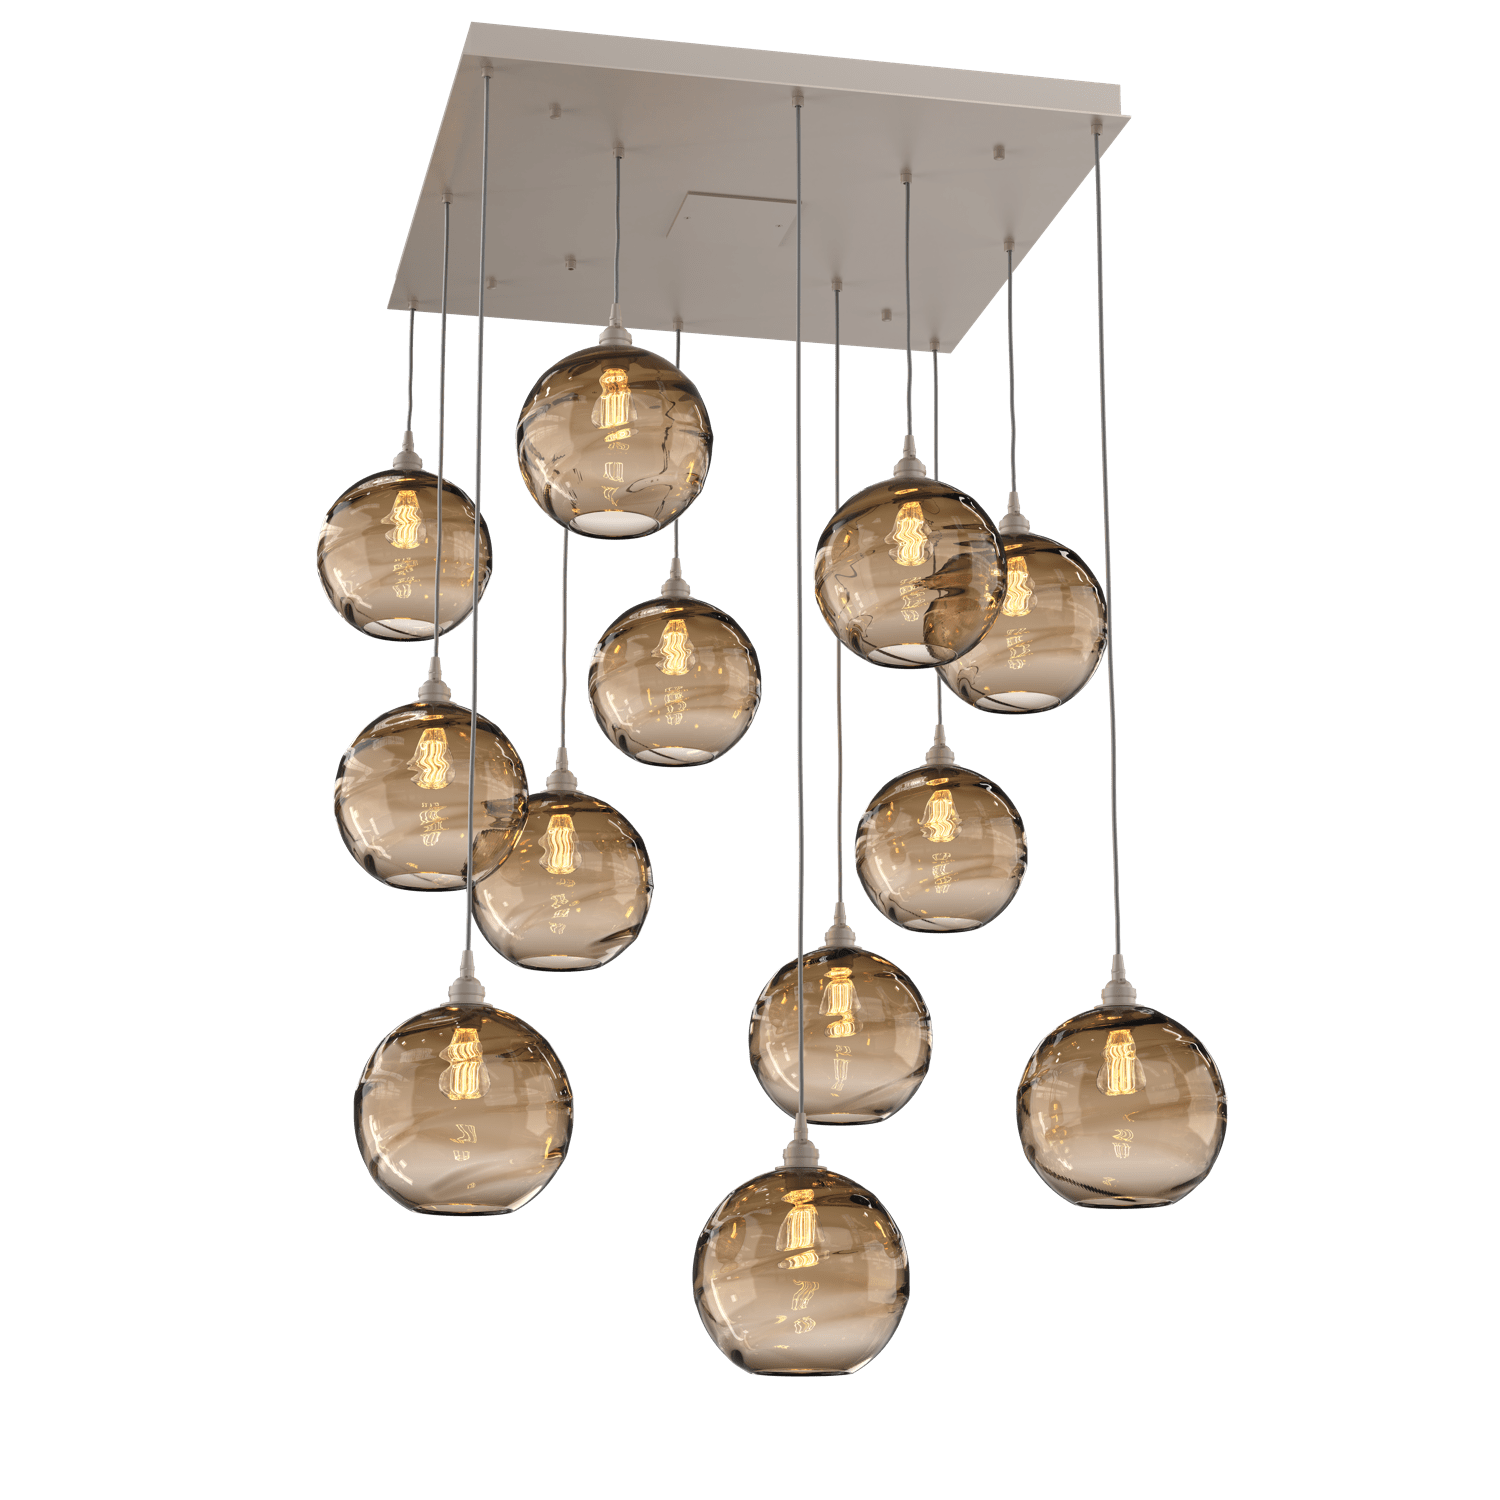 CHB0047-12-BS-OB-Hammerton-Studio-Optic-Blown-Glass-Terra-12-light-square-pendant-chandelier-with-metallic-beige-silver-finish-and-optic-bronze-blown-glass-shades-and-incandescent-lamping